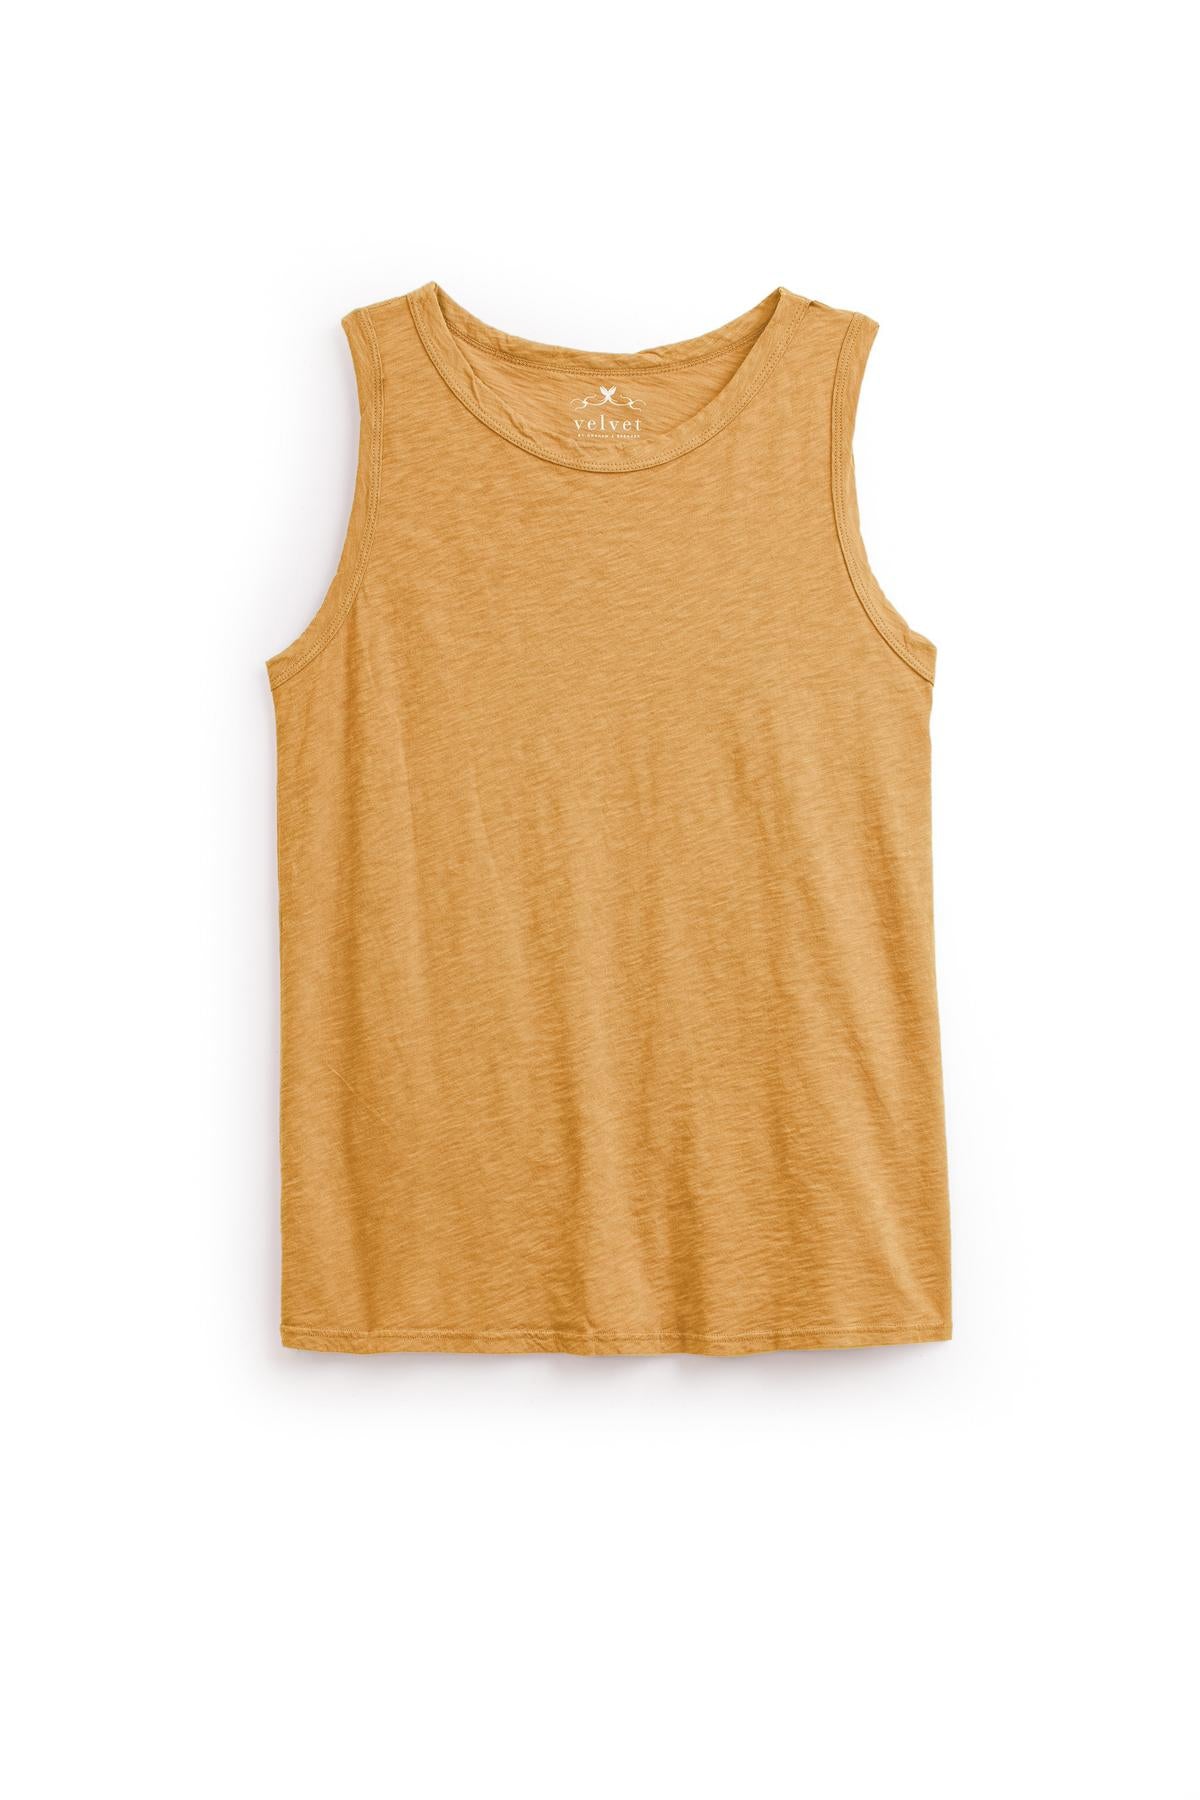   The Velvet by Graham & Spencer TAURUS TANK TOP is a timeless crew neck, sleeveless tank top in a mustard hue, crafted from textured cotton slub and displayed on a white background. 